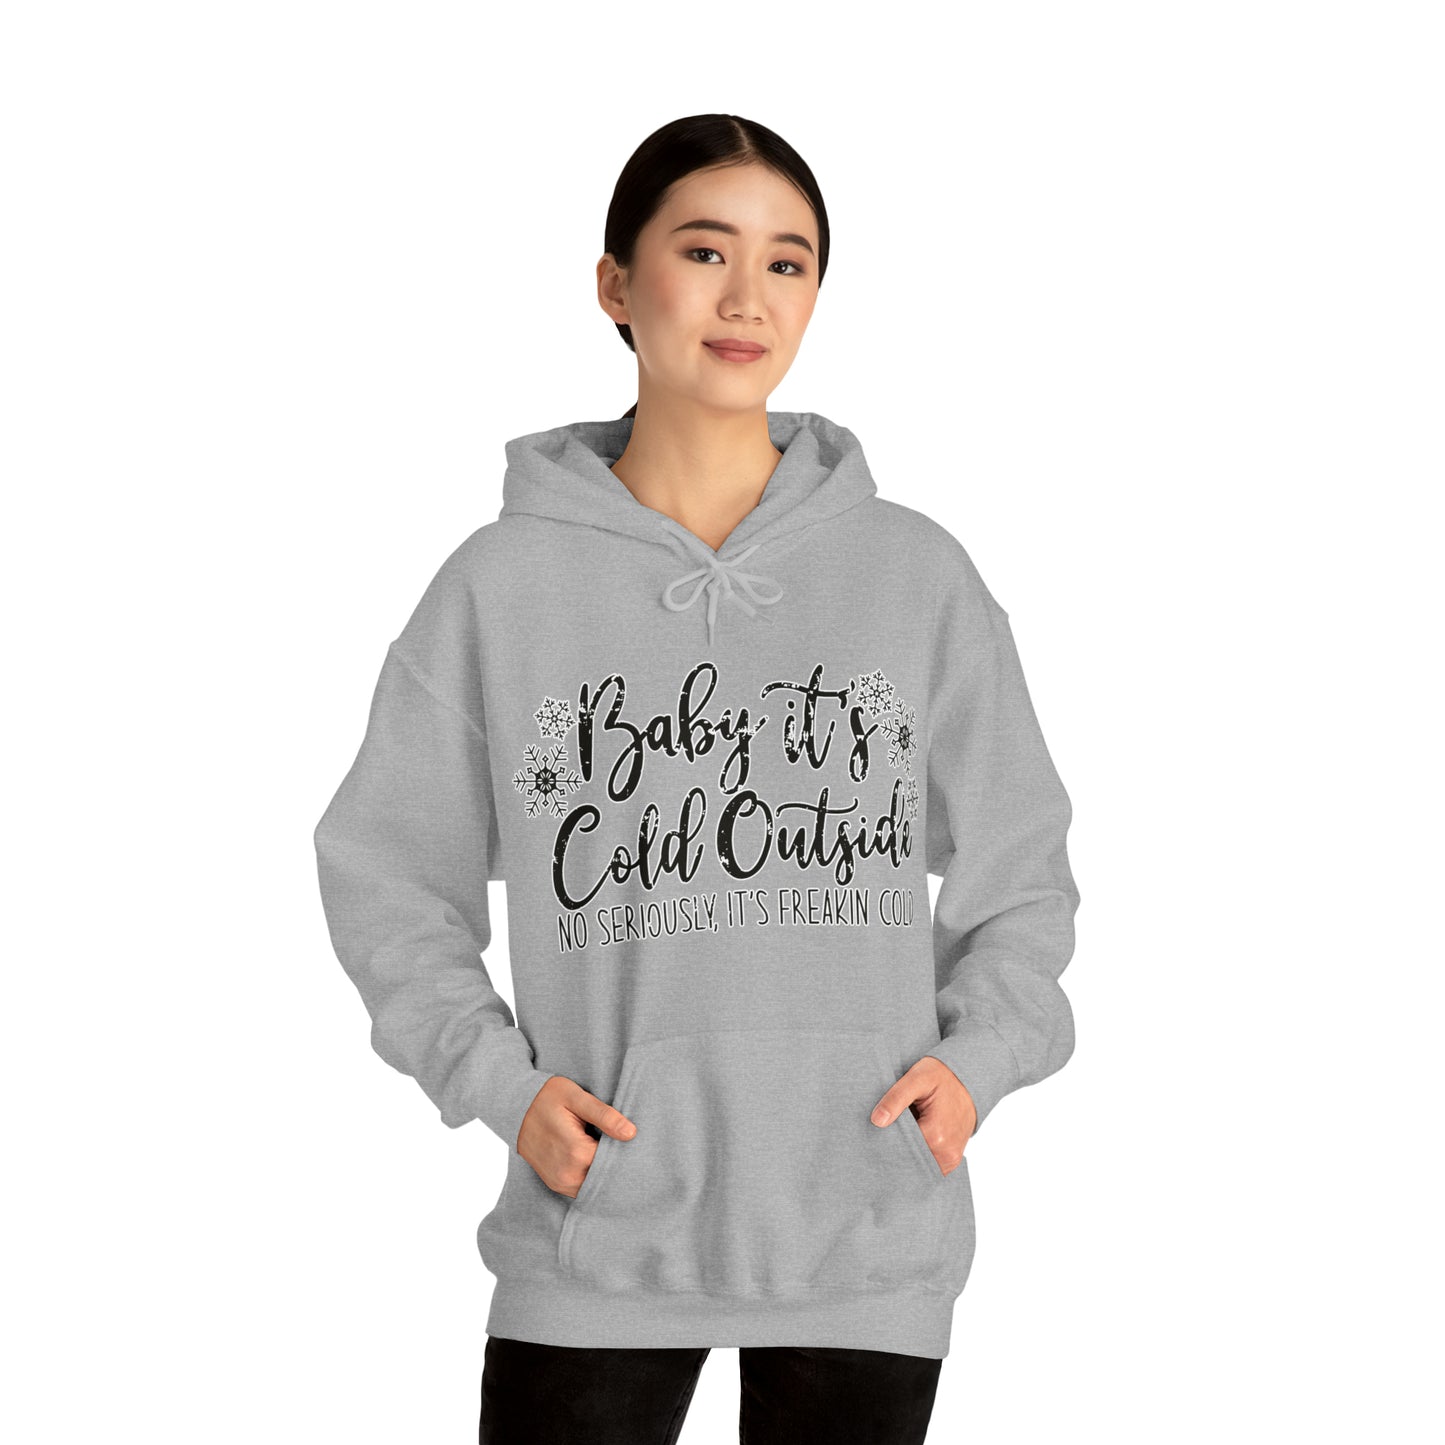 Baby, It's Cold Outside, No Seriously It's Freaking Cold: Unisex Heavy Blend™ Hooded Sweatshirt